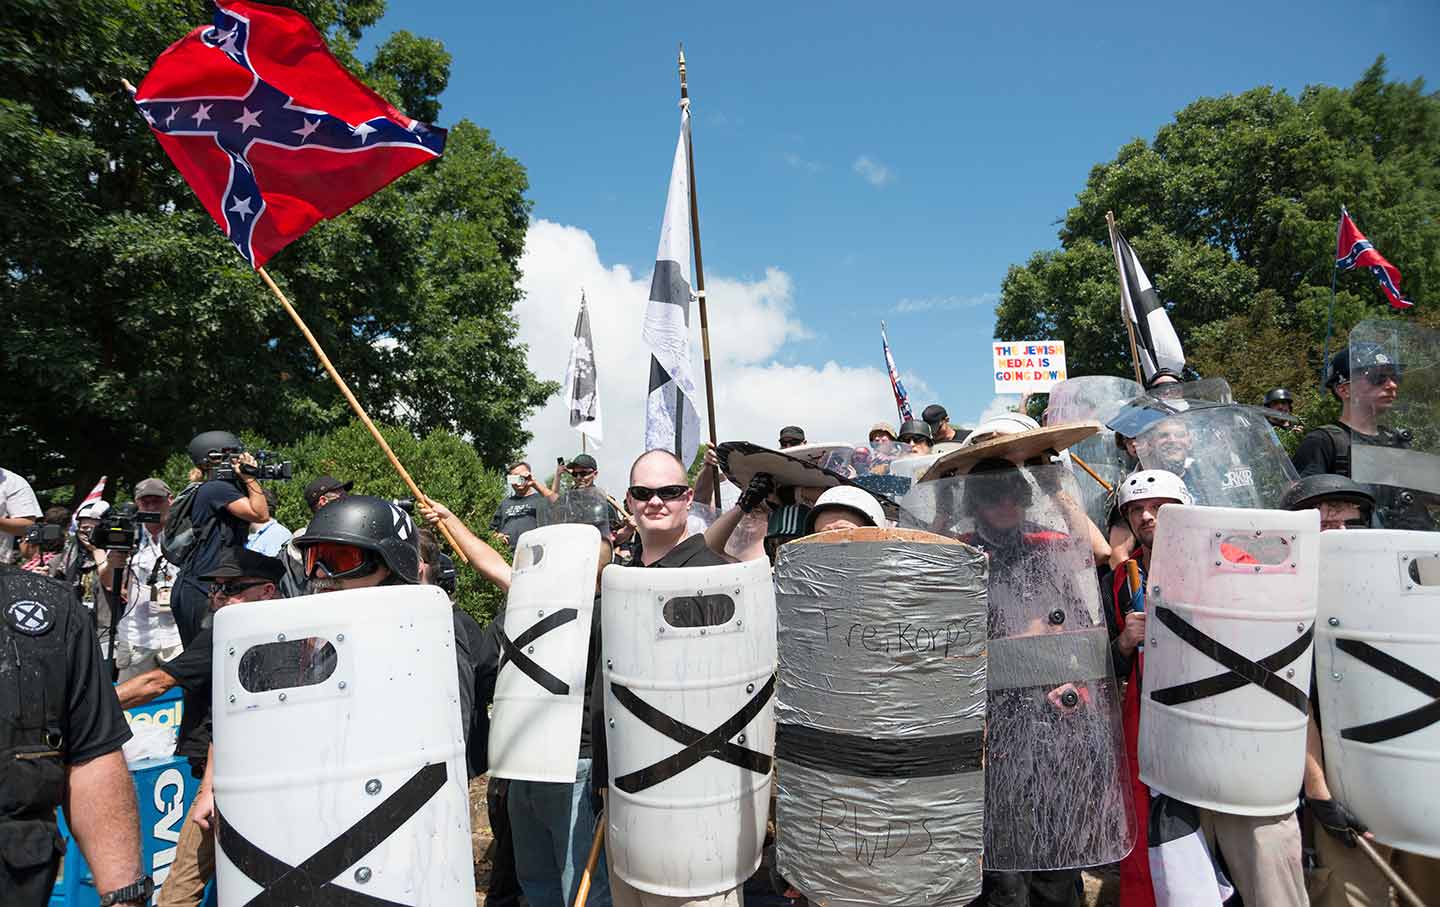 White Supremacists in Charlottesville